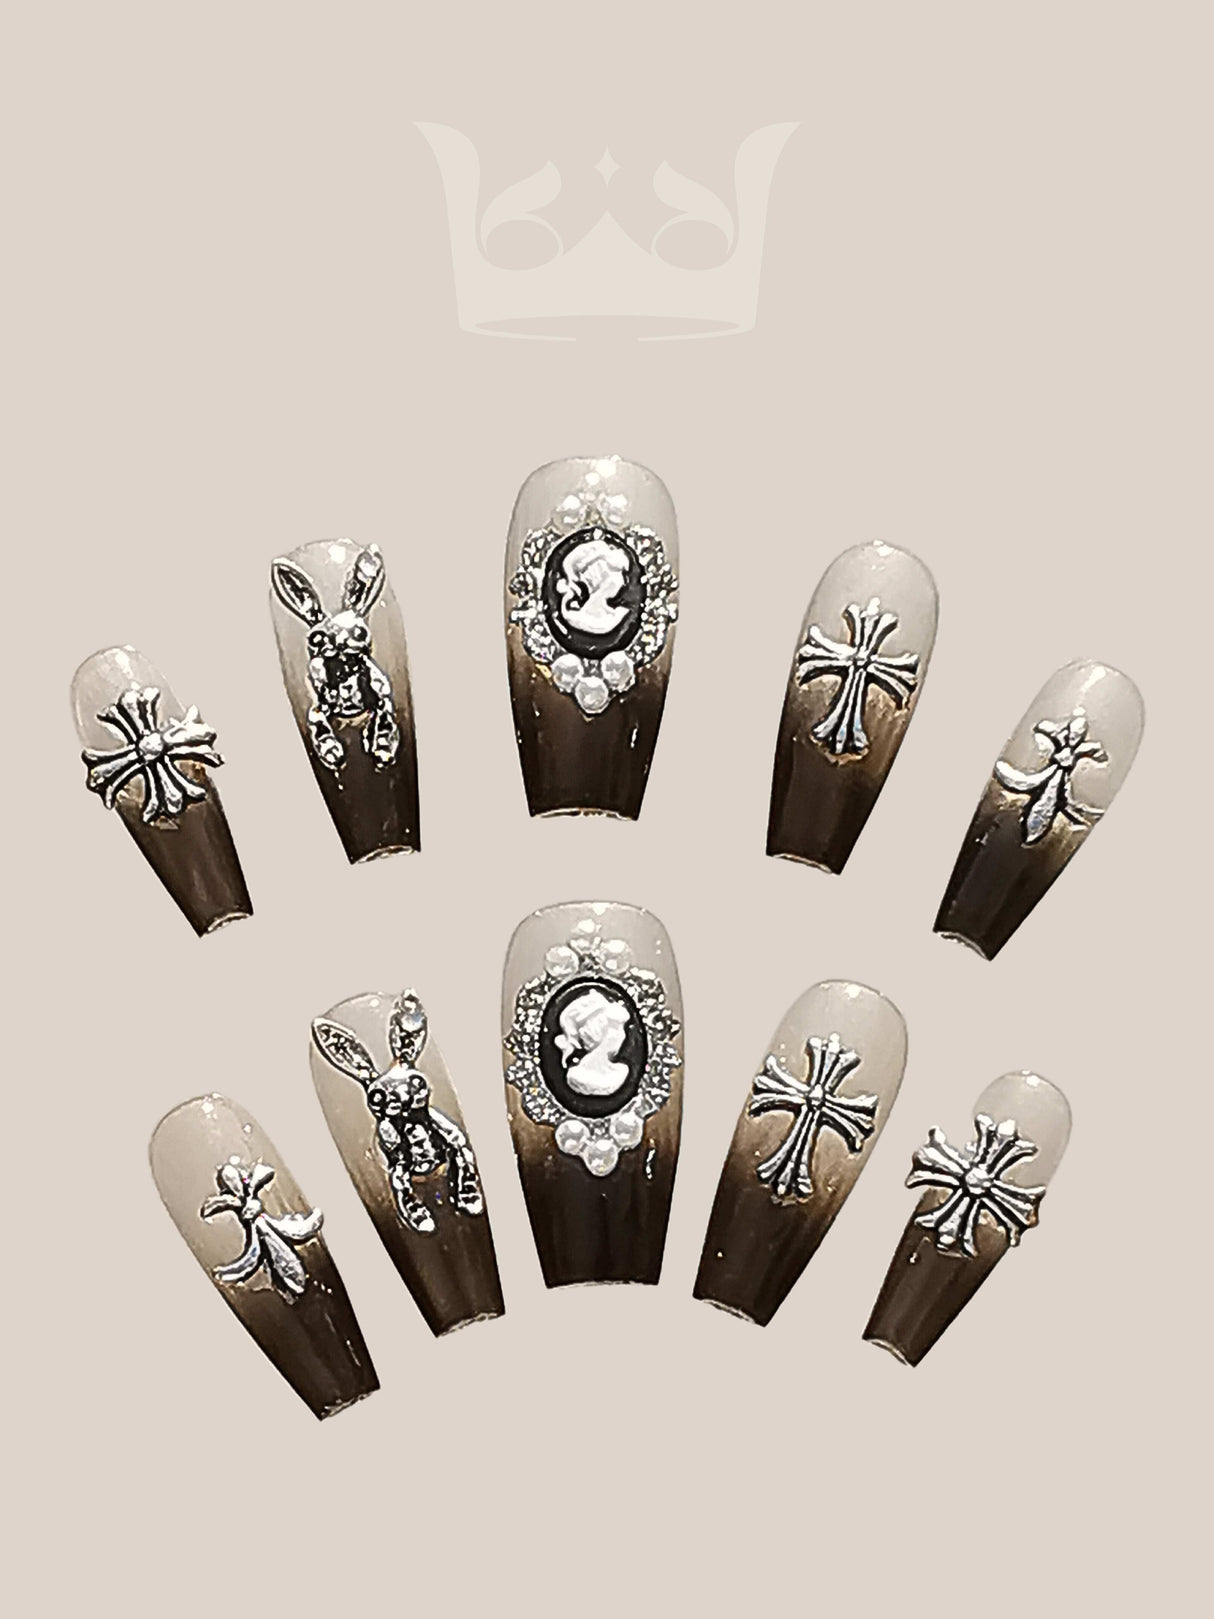 Opulent and eye-catching nails with metallic accents and gem-like embellishments are perfect for special occasions or making a fashion statement.